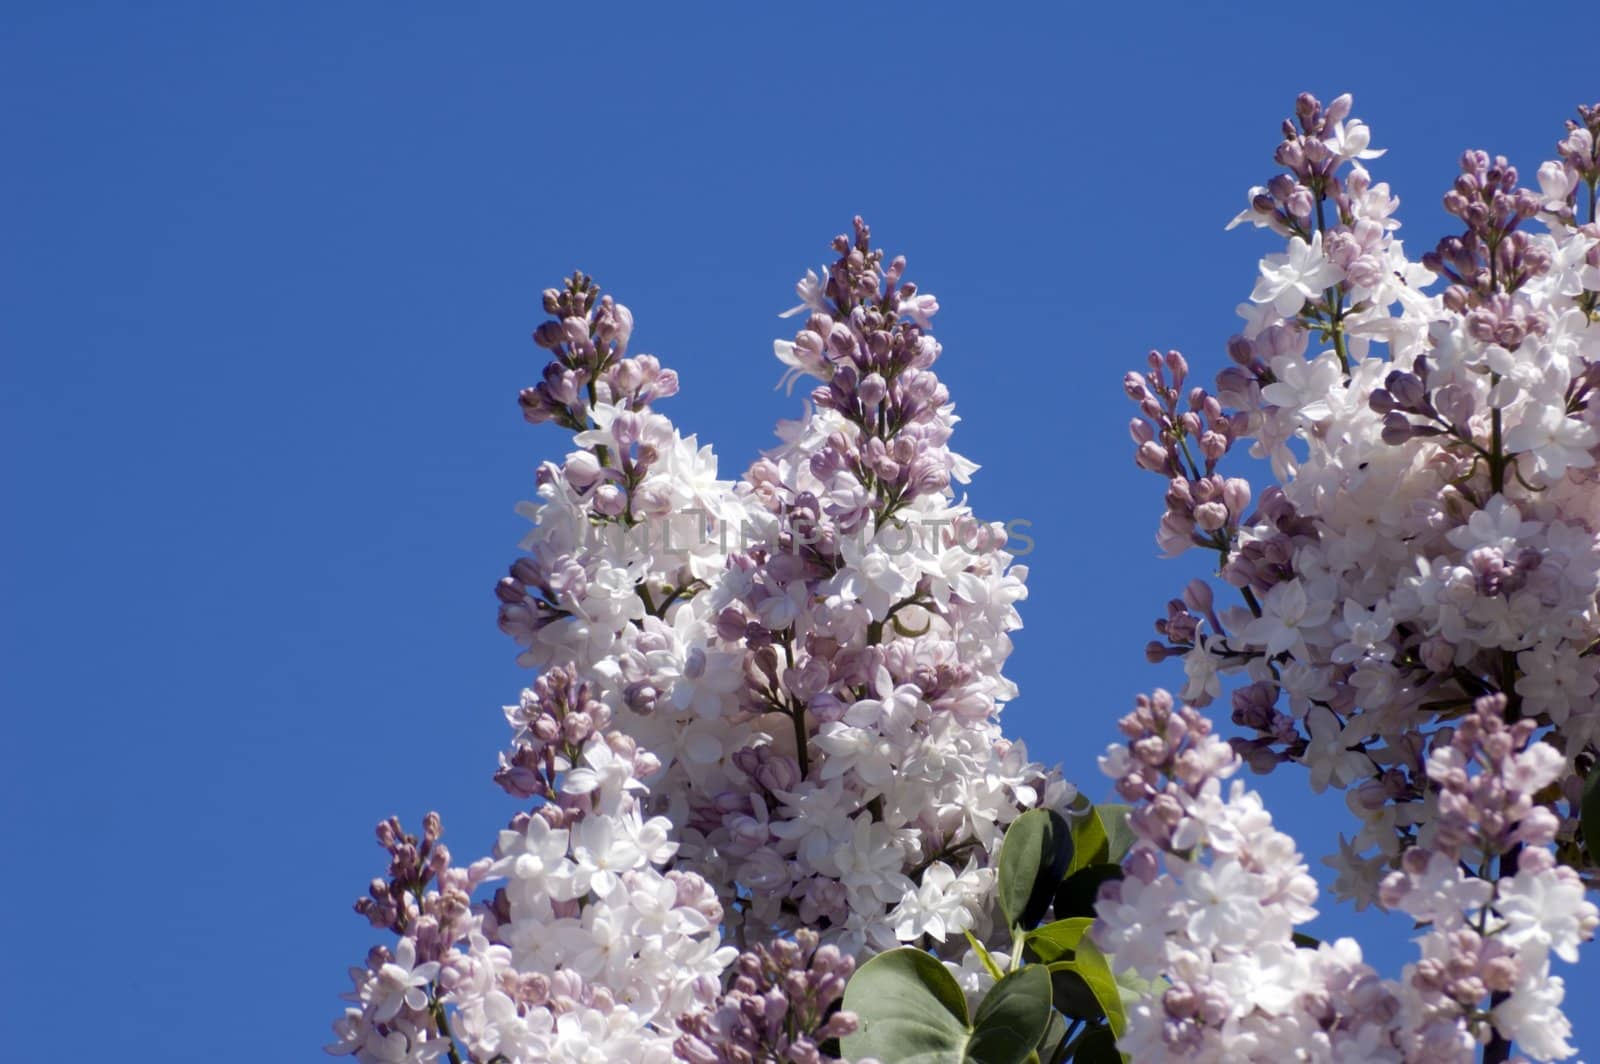 Lilac flowers on blue sky background